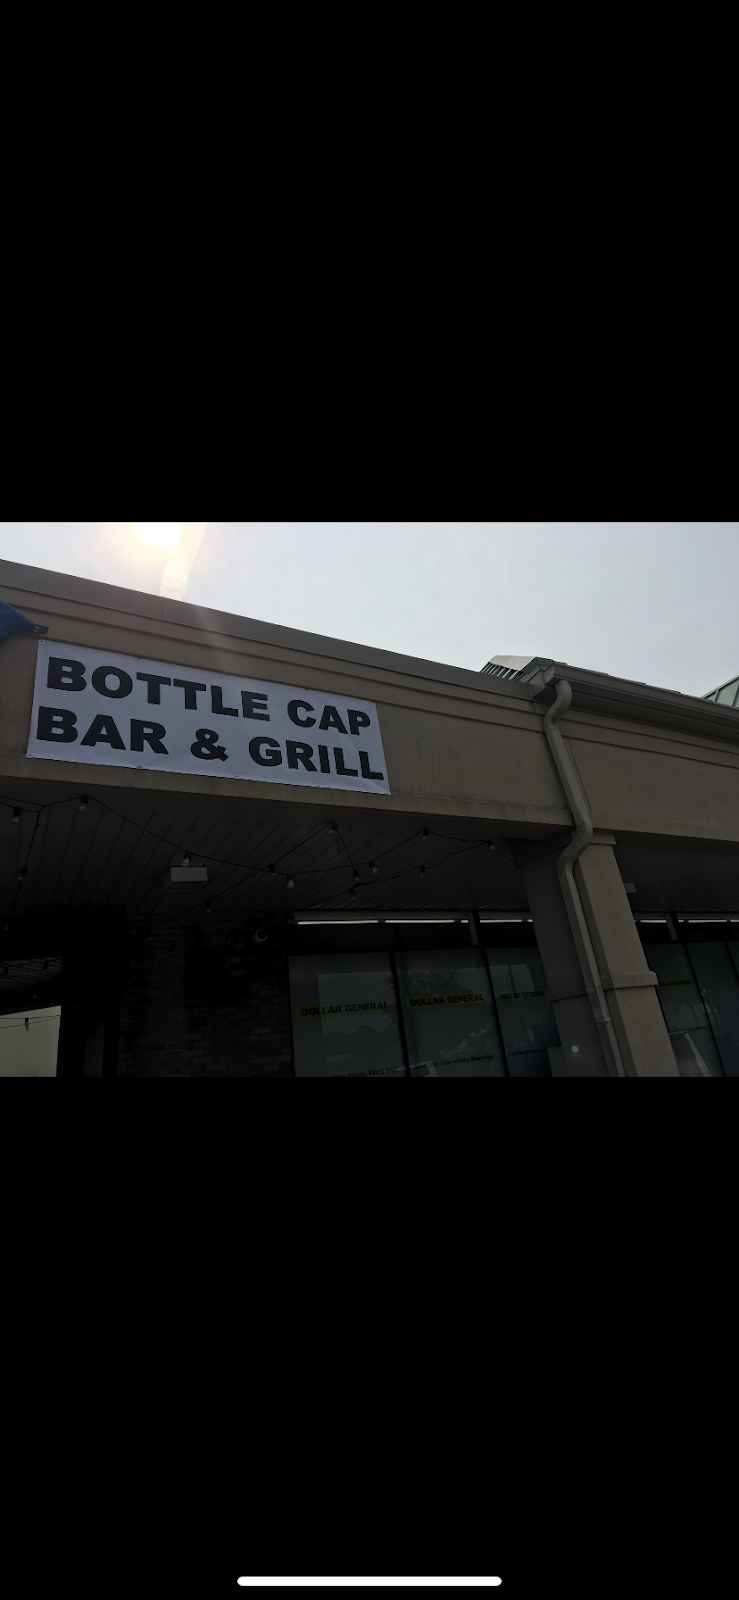 Bottle Cap Bar And Grill | 5775 Chevrolet Blvd, Parma, OH 44130 | Phone: (440) 340-4646